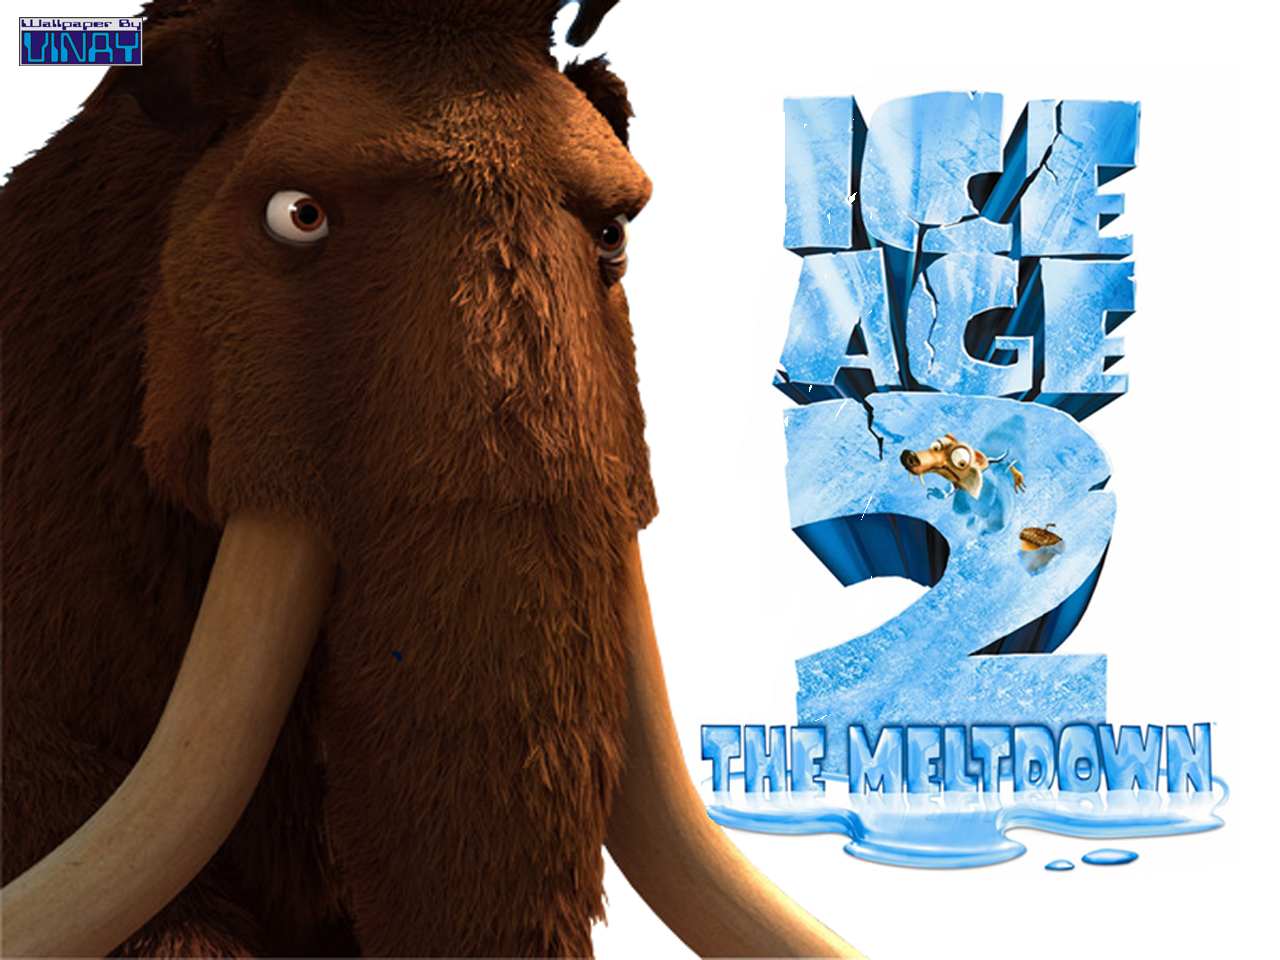 Download full size Ice Age 2 wallpaper / Movies / 1280x960